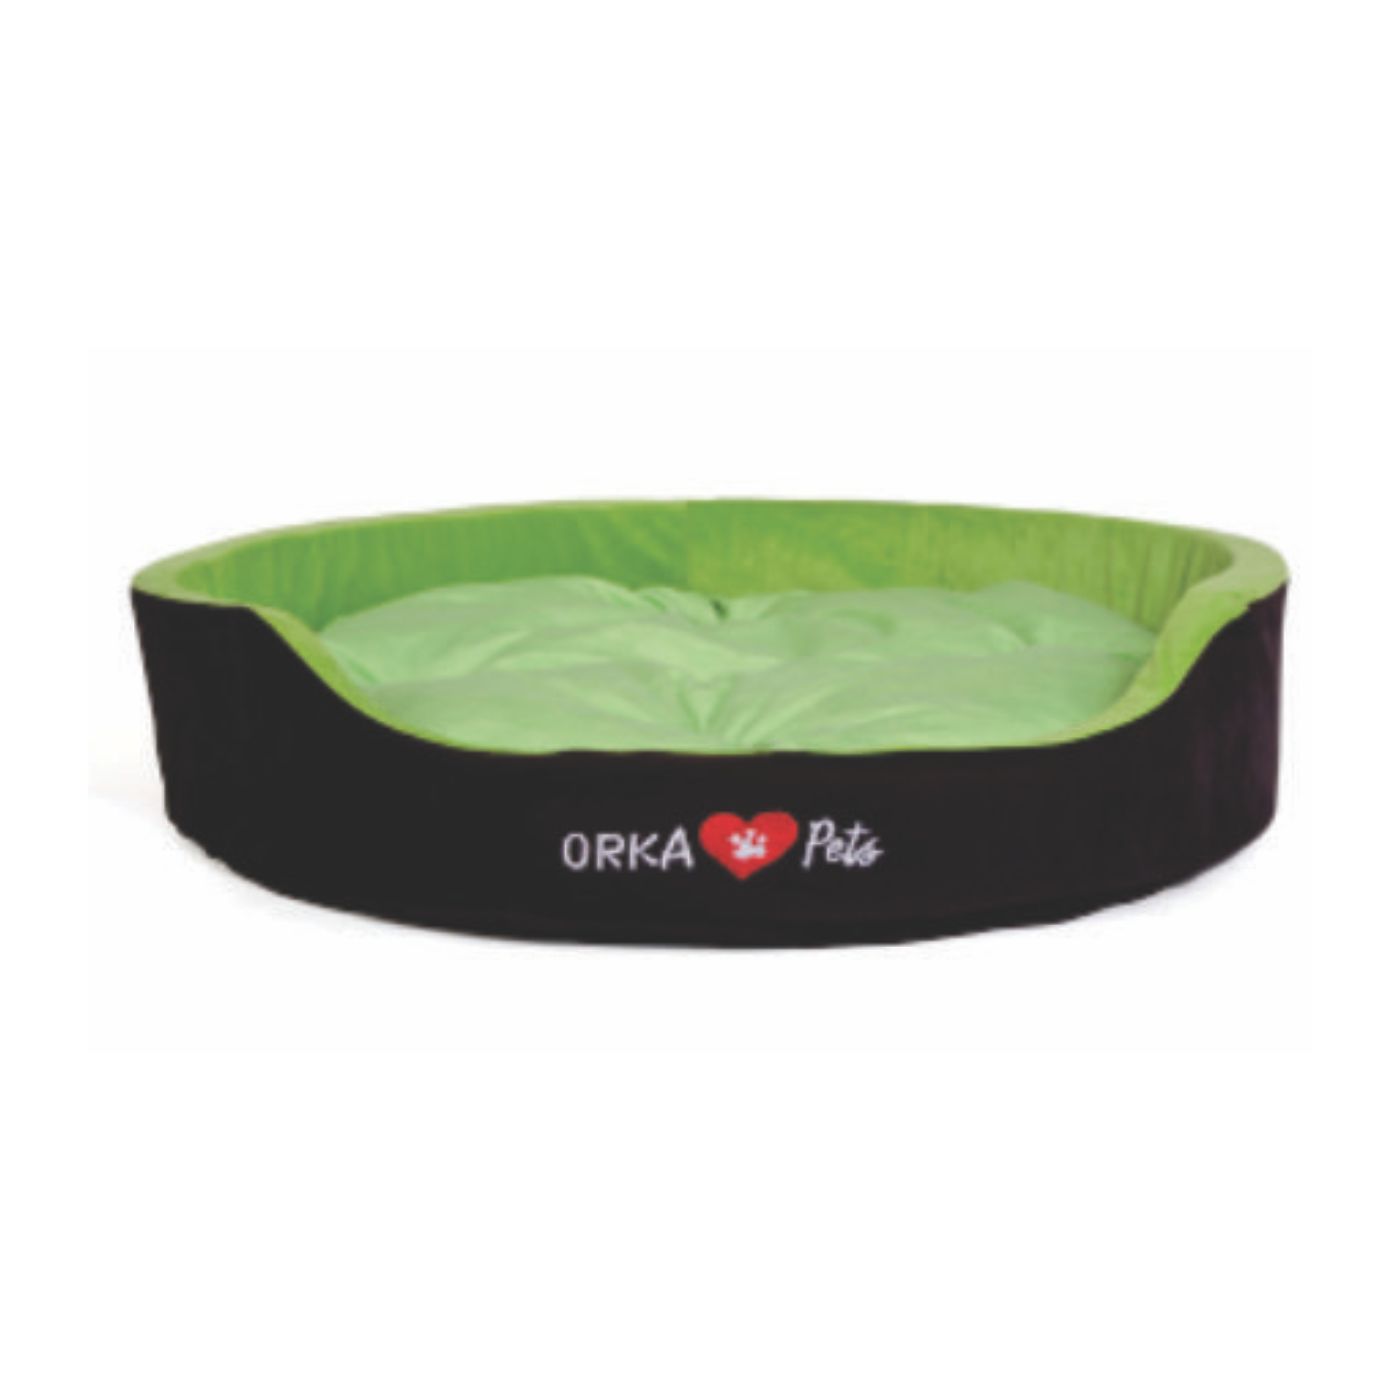 Orka Pet Bed Large - Black And Green  